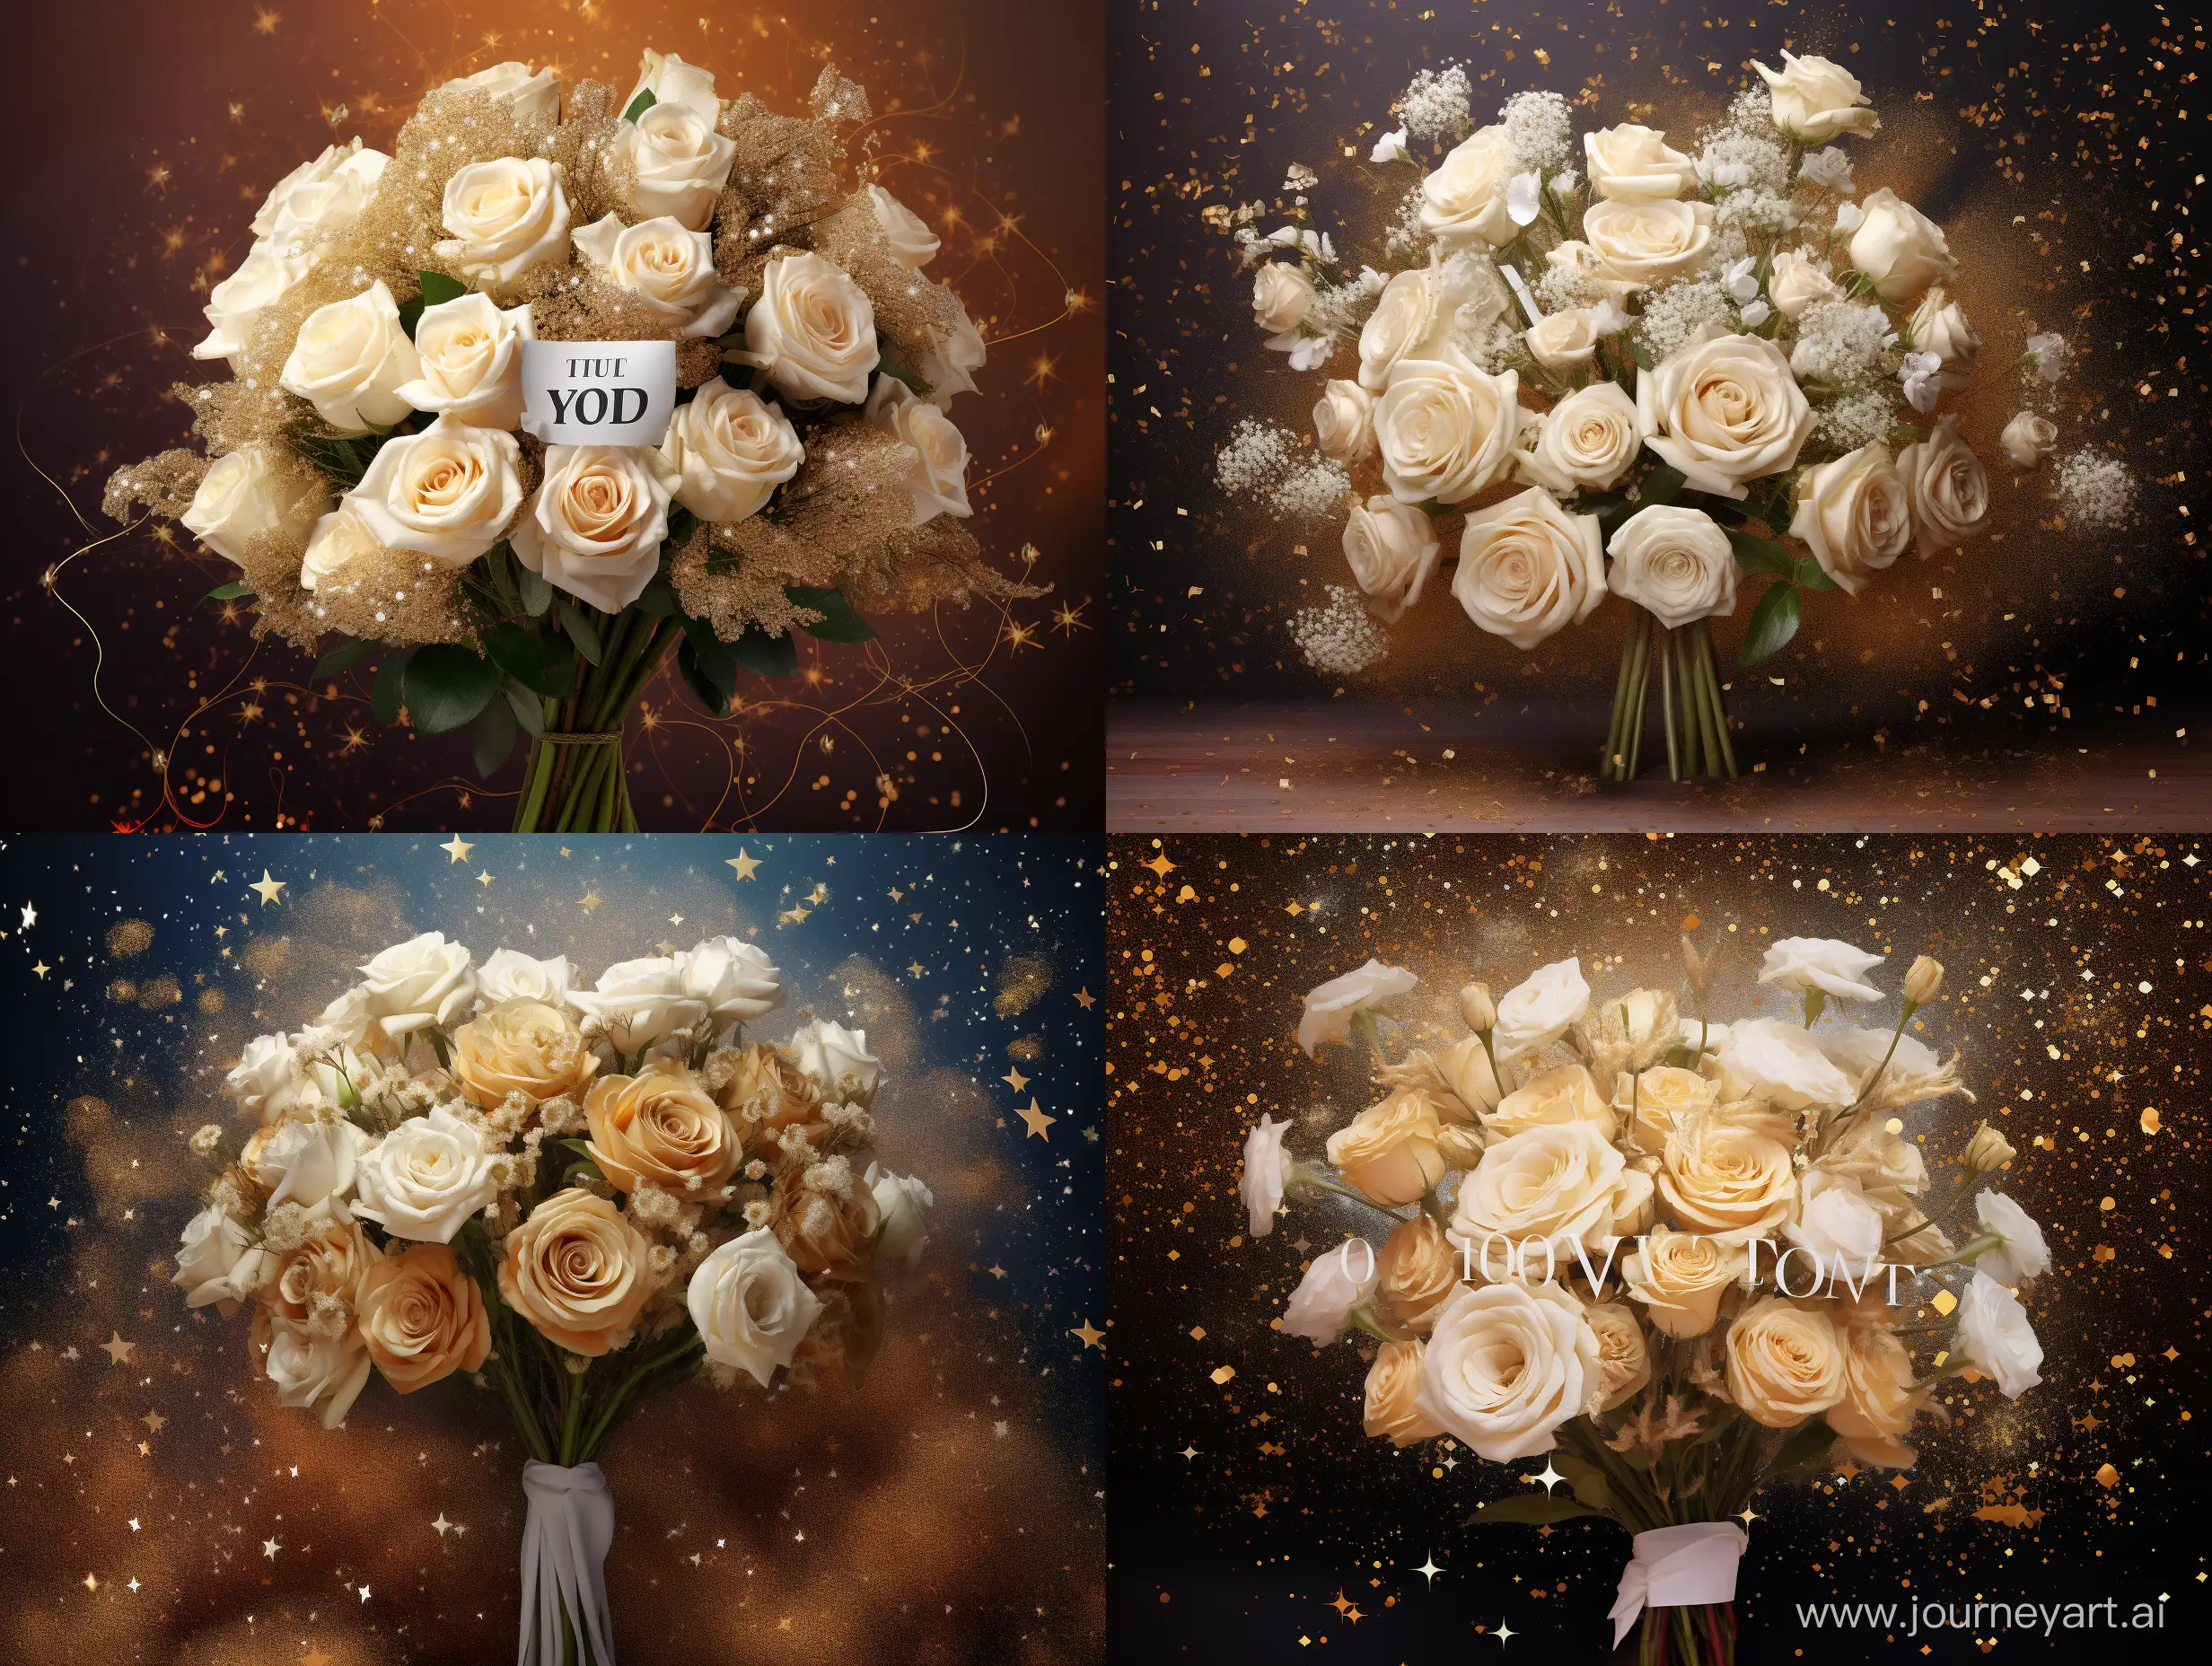 Romantic-Gesture-Professing-Love-Amidst-Cosmic-Beauty-with-White-Roses